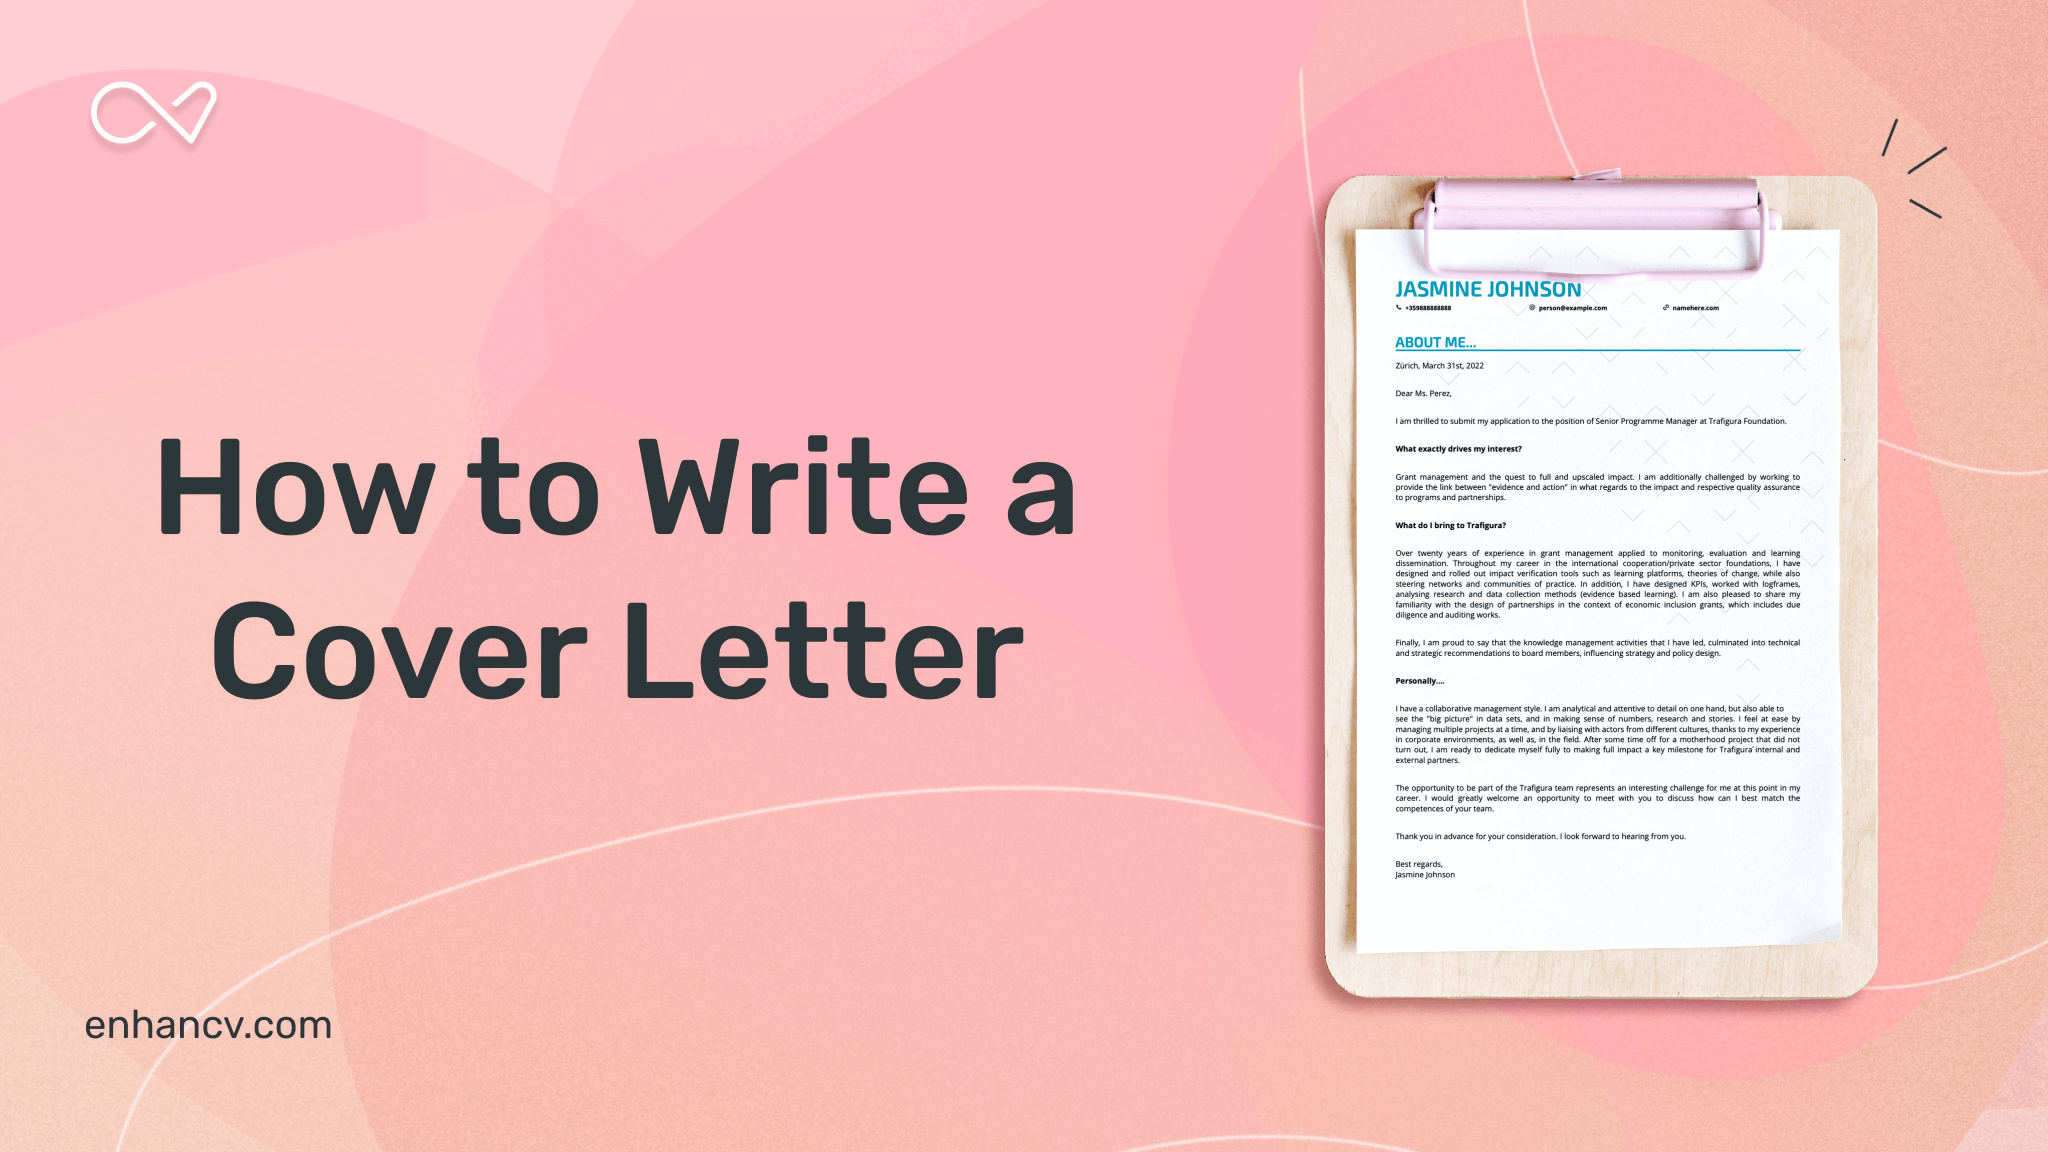 The complete guide to writing a Cover Letter